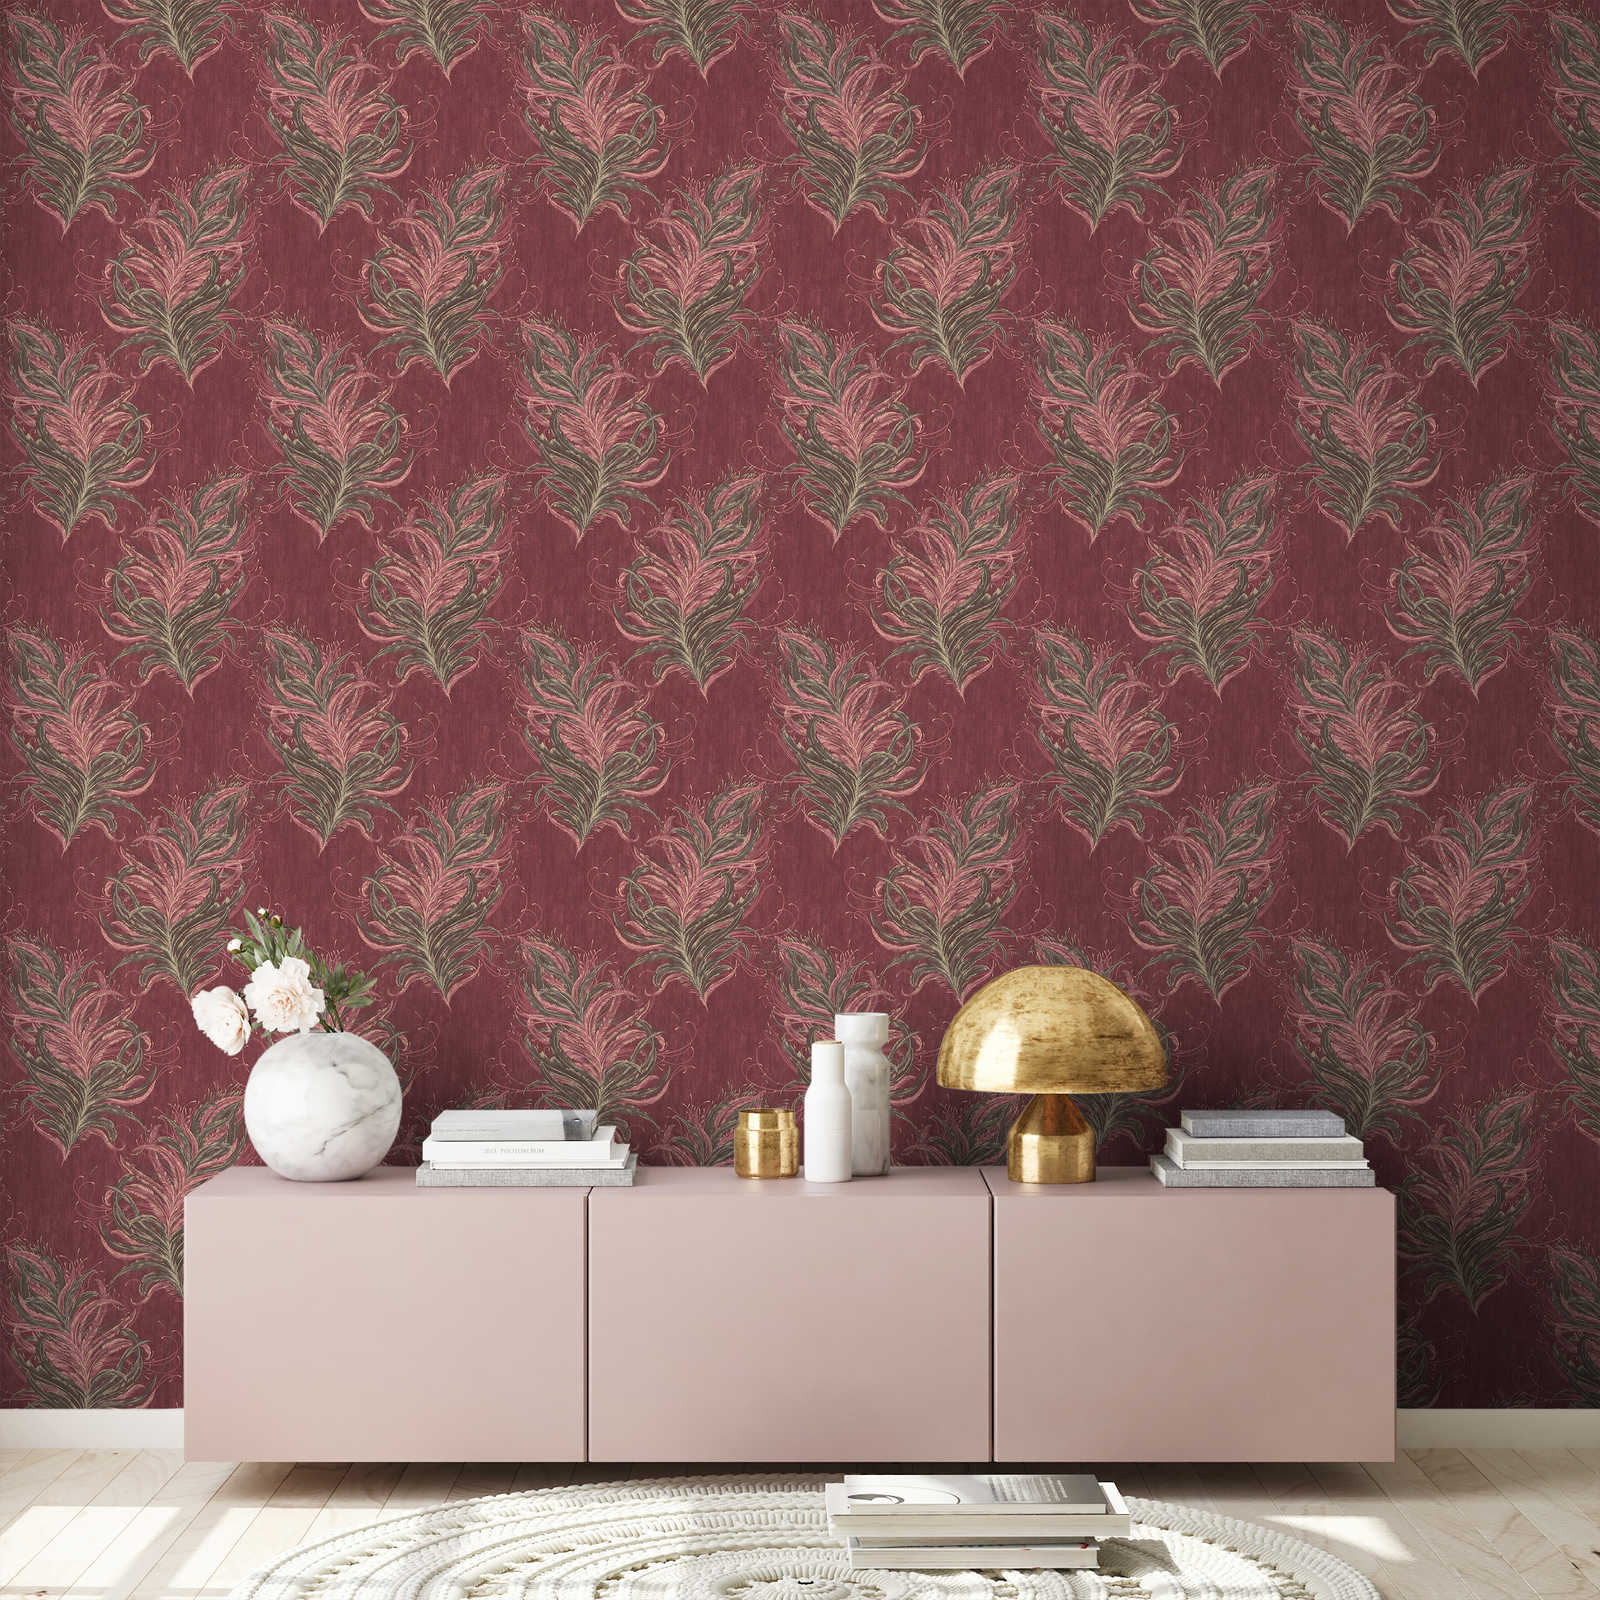             Red wallpaper with feathers, gold design & texture effect
        